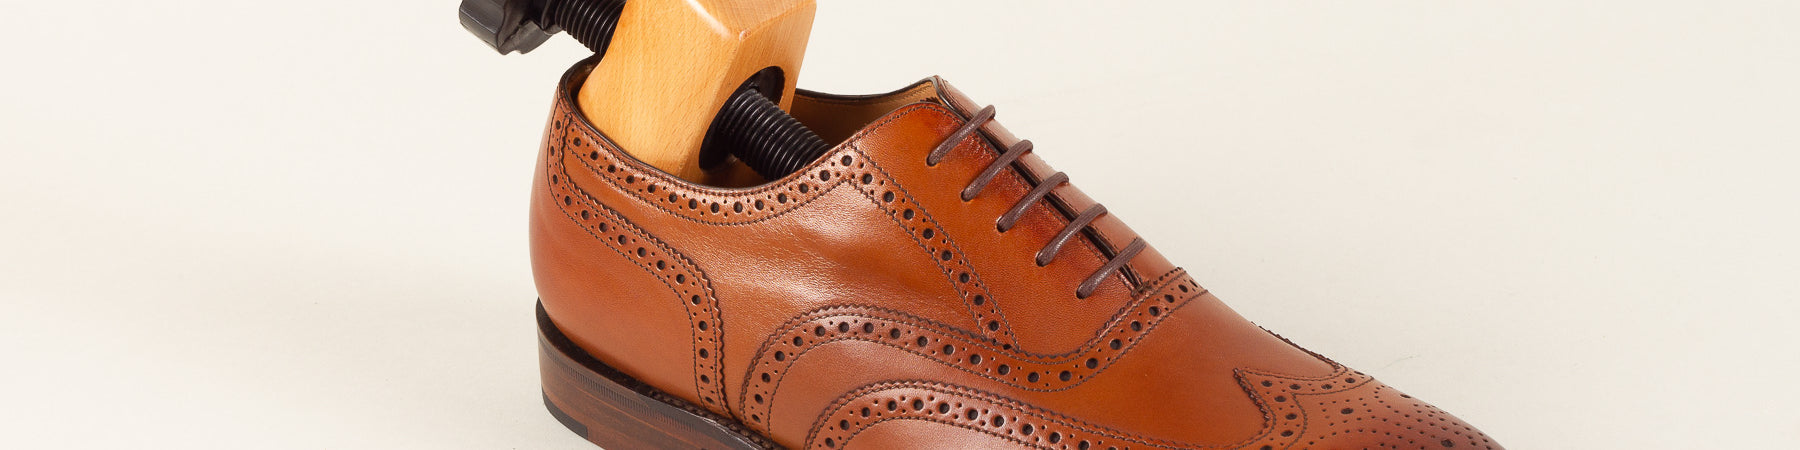 How to stretch your shoes and make them fit well